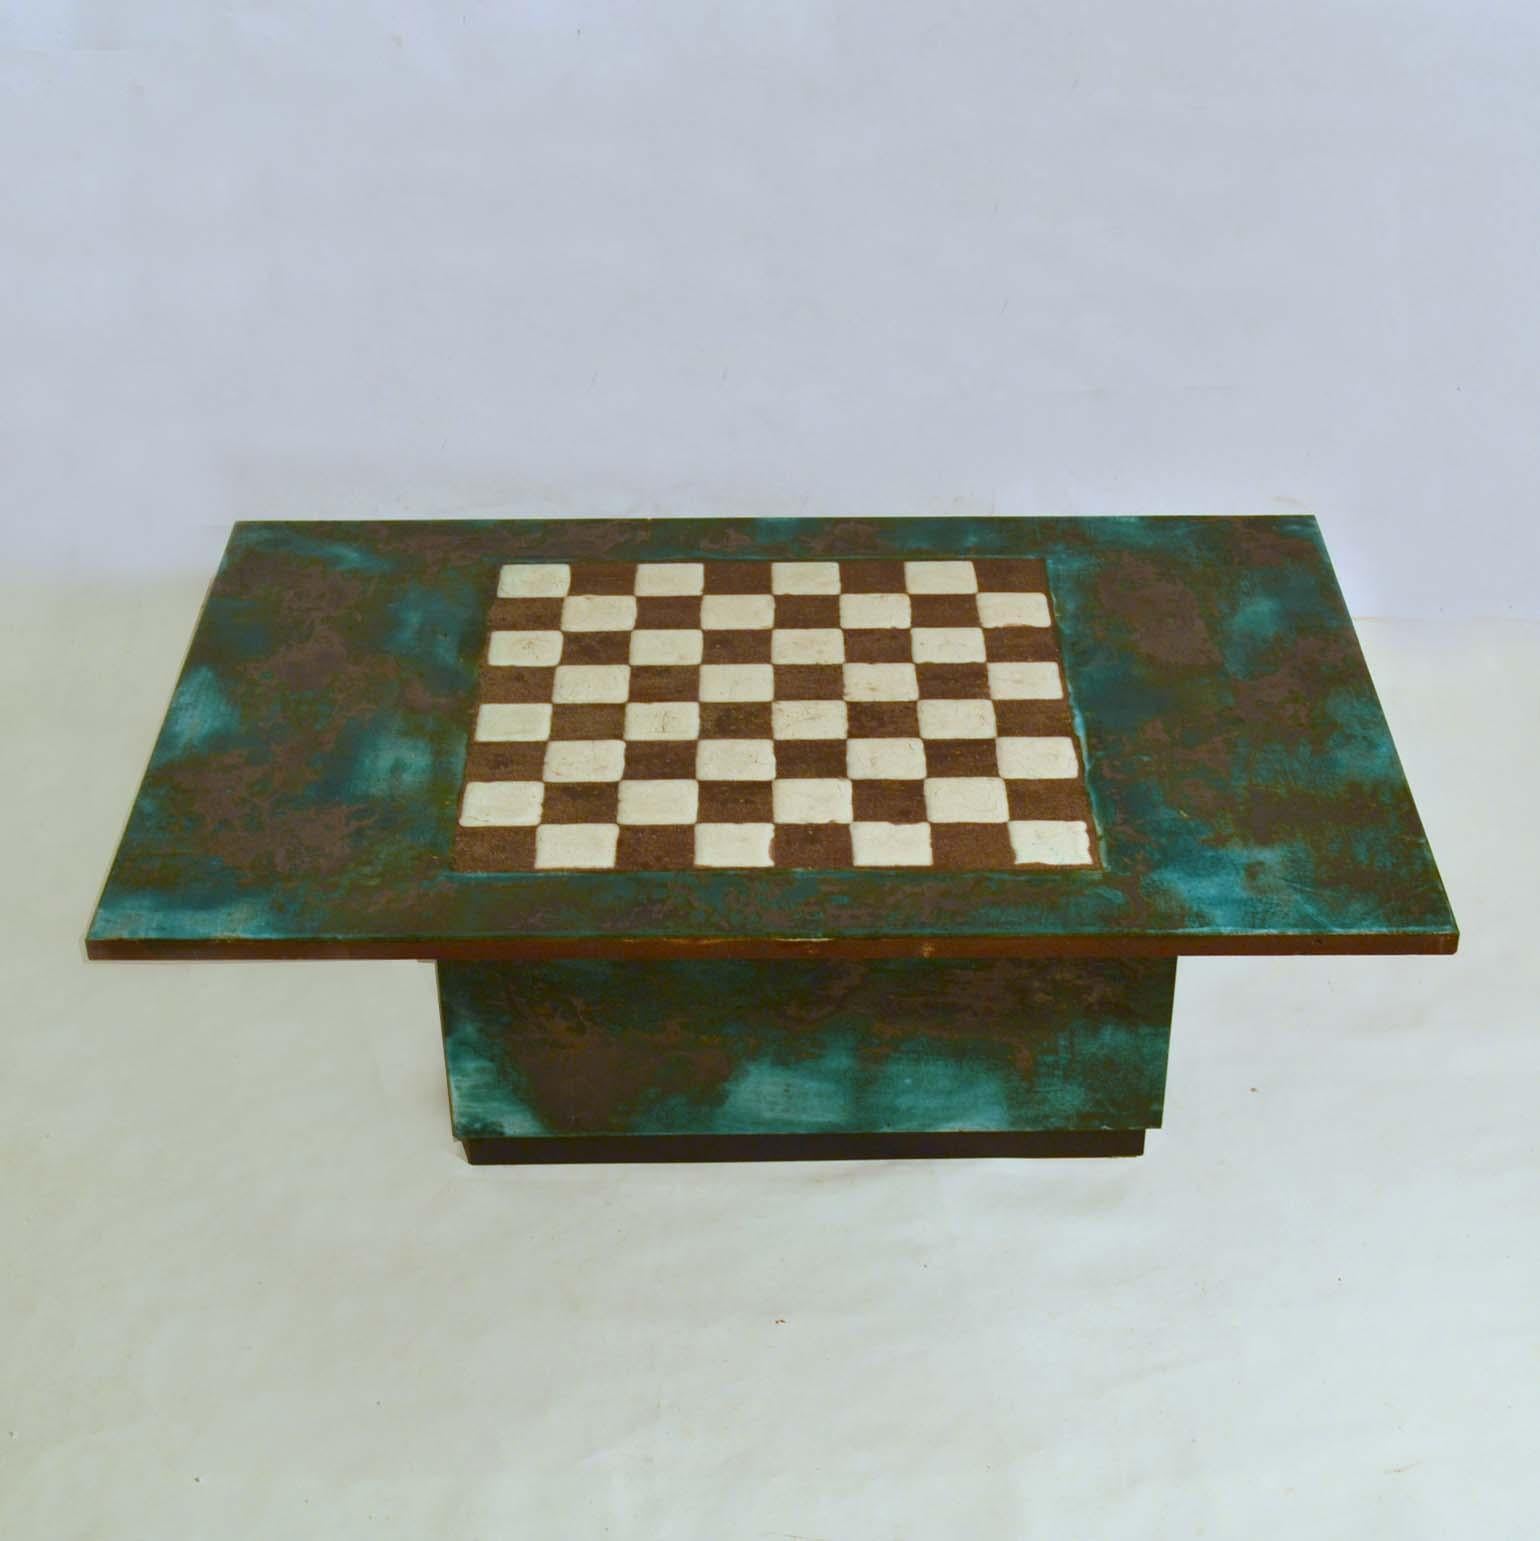 Unique 1960s hand sculpted chess table and coffee table is sculptural and yet functional, made out of large ceramic slabs and glazed in function of the game. The table exudes a Material richness and graphic simplicity. The black sections are not